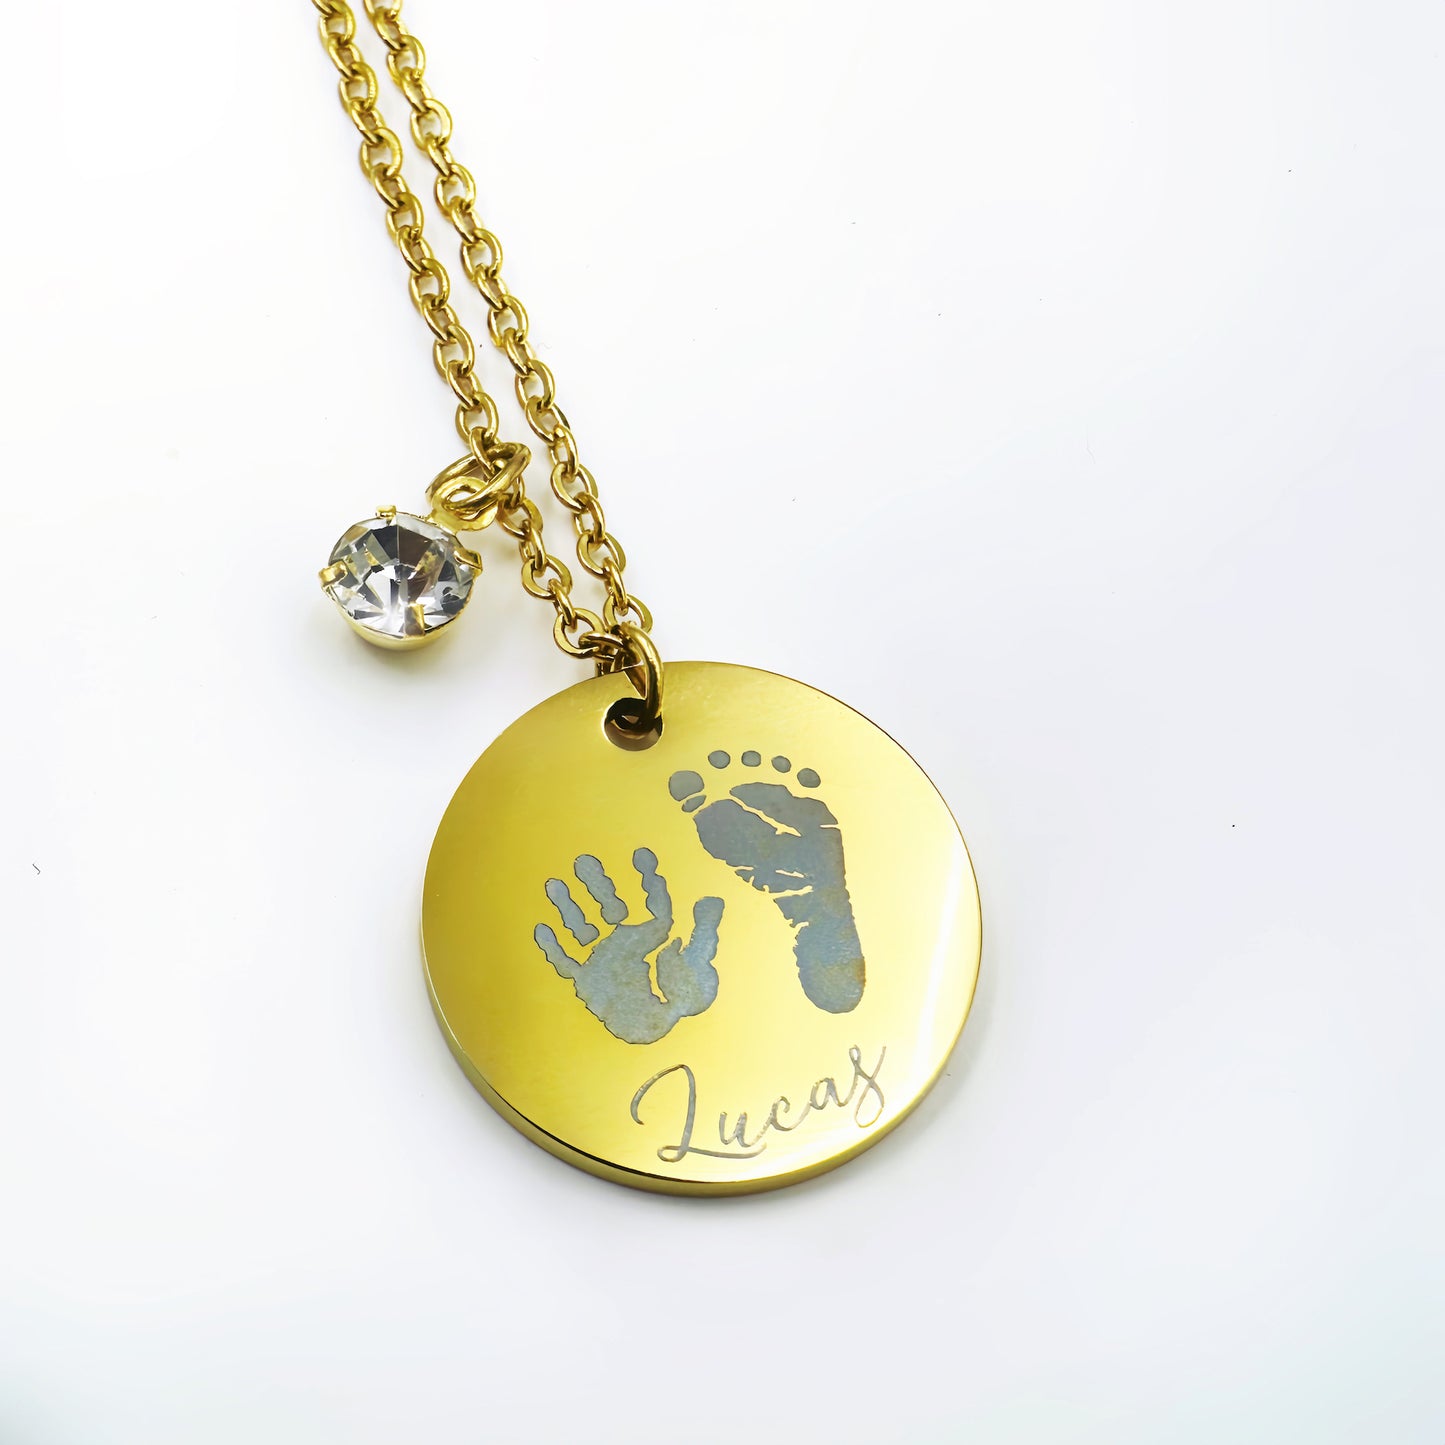 Baby Hand Print and Foot Print Necklaces